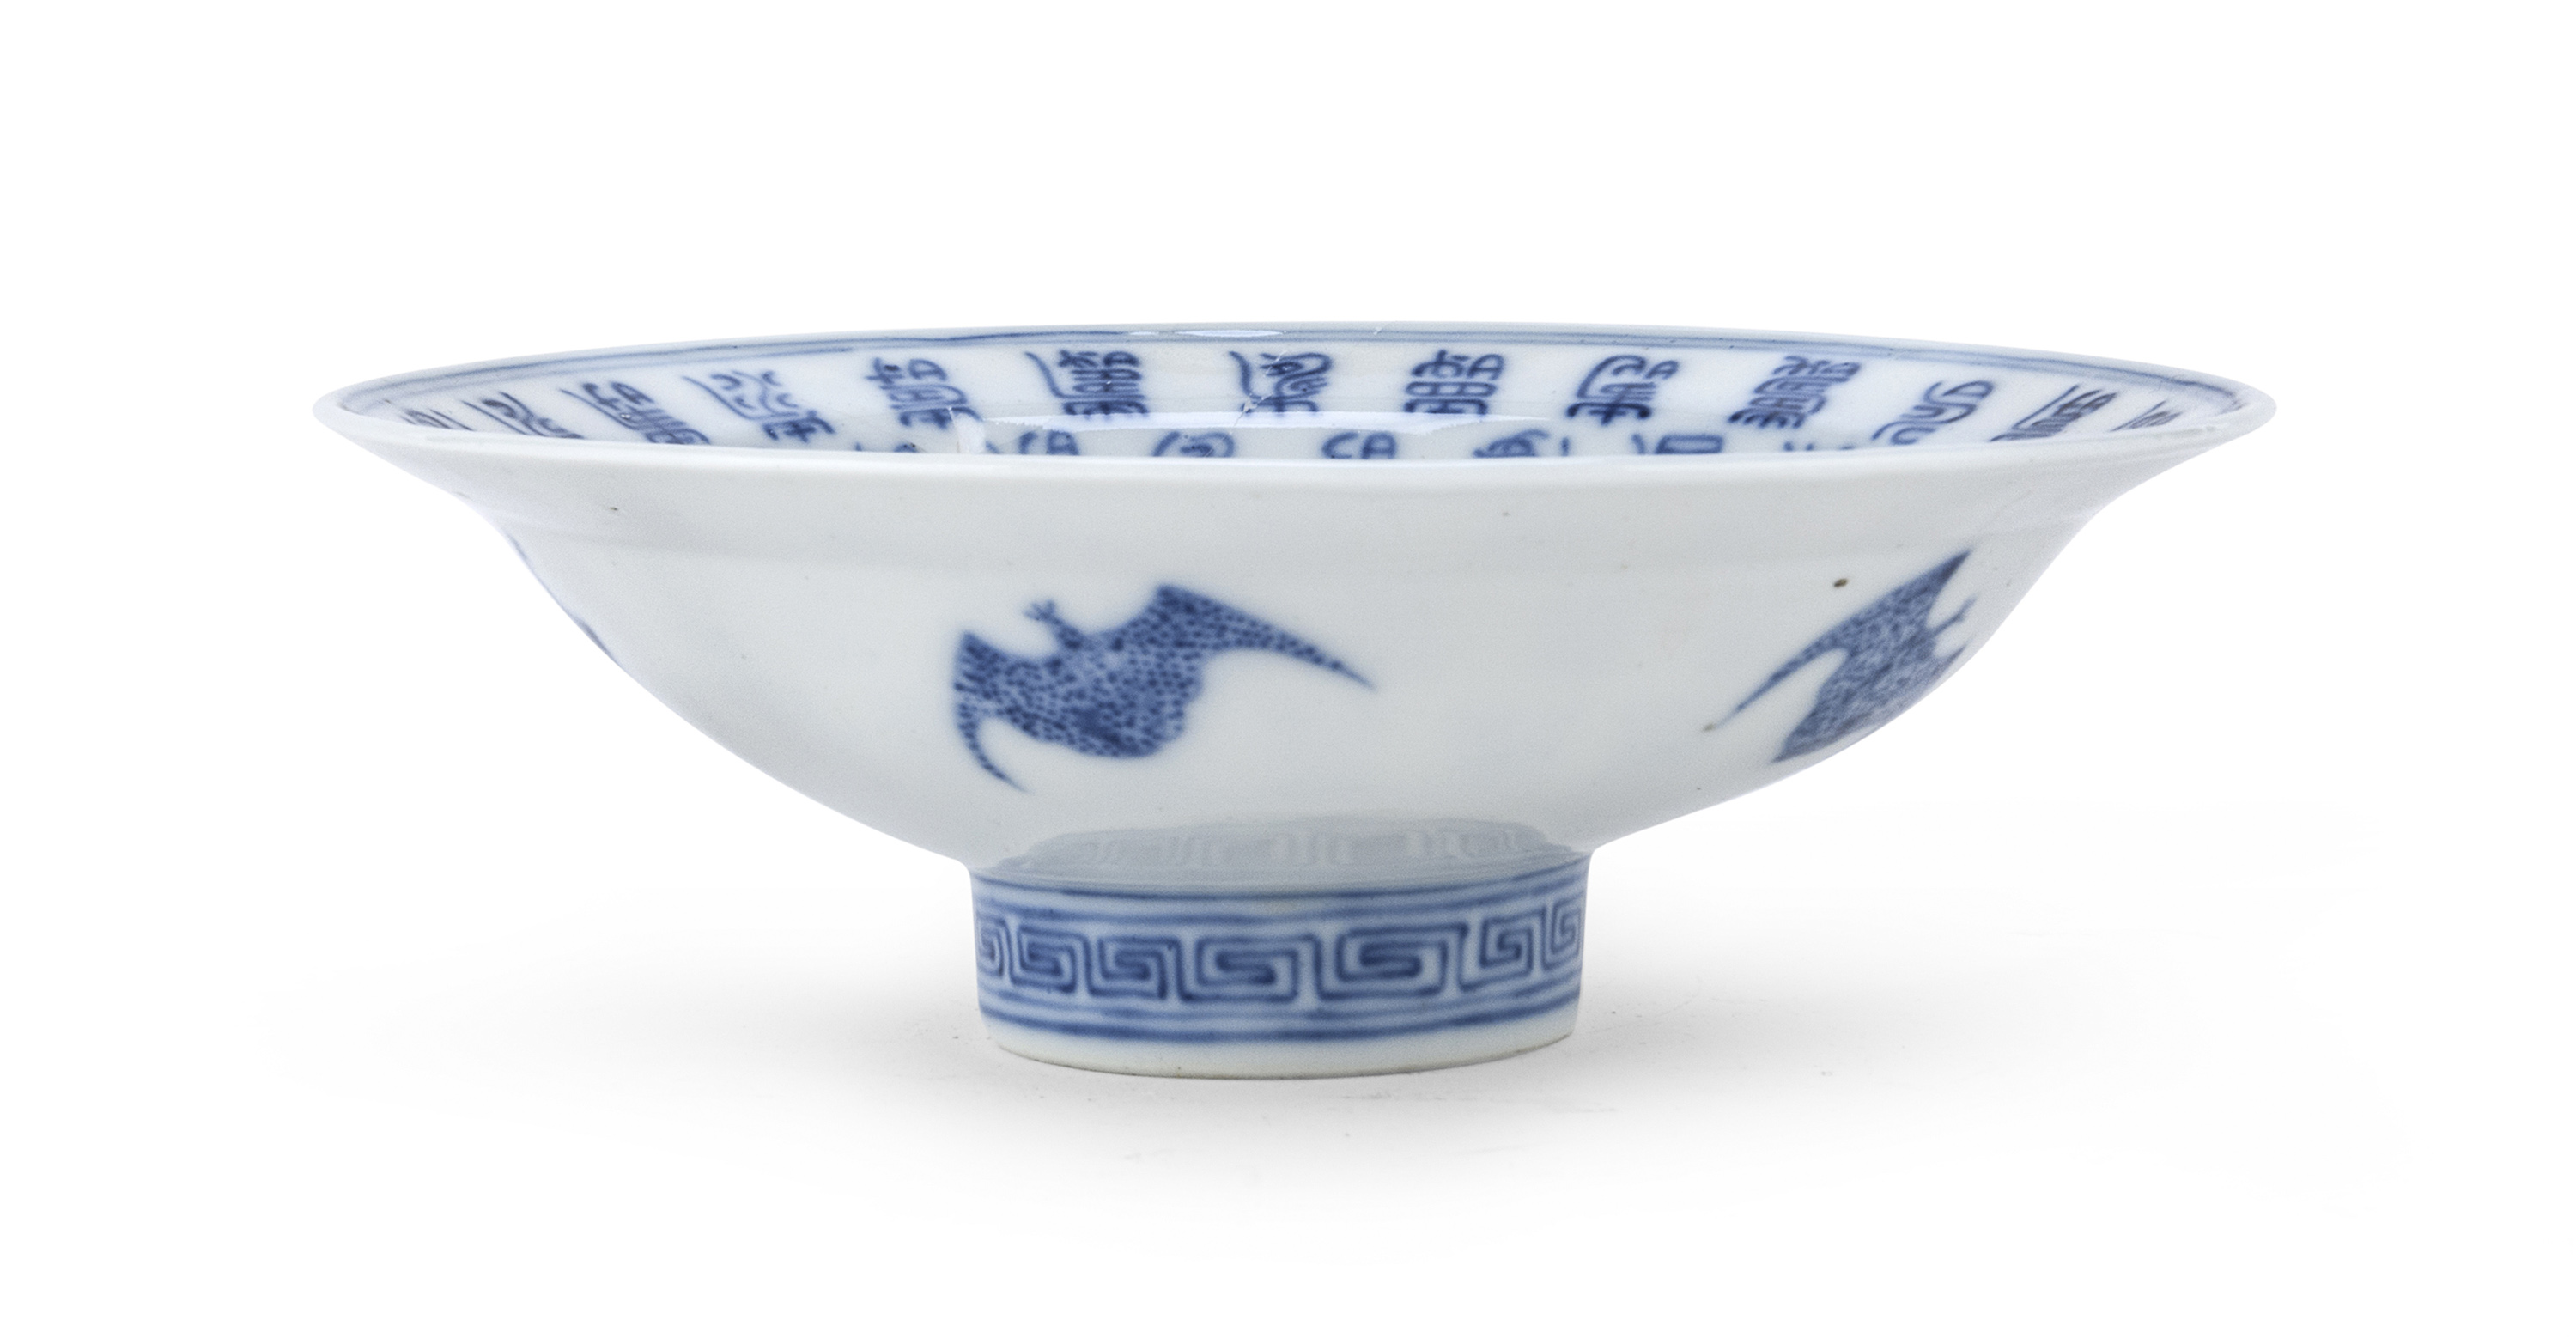 A CHINESE WHITE AND BLUE PORCELAIN STAND 20TH CENTURY.